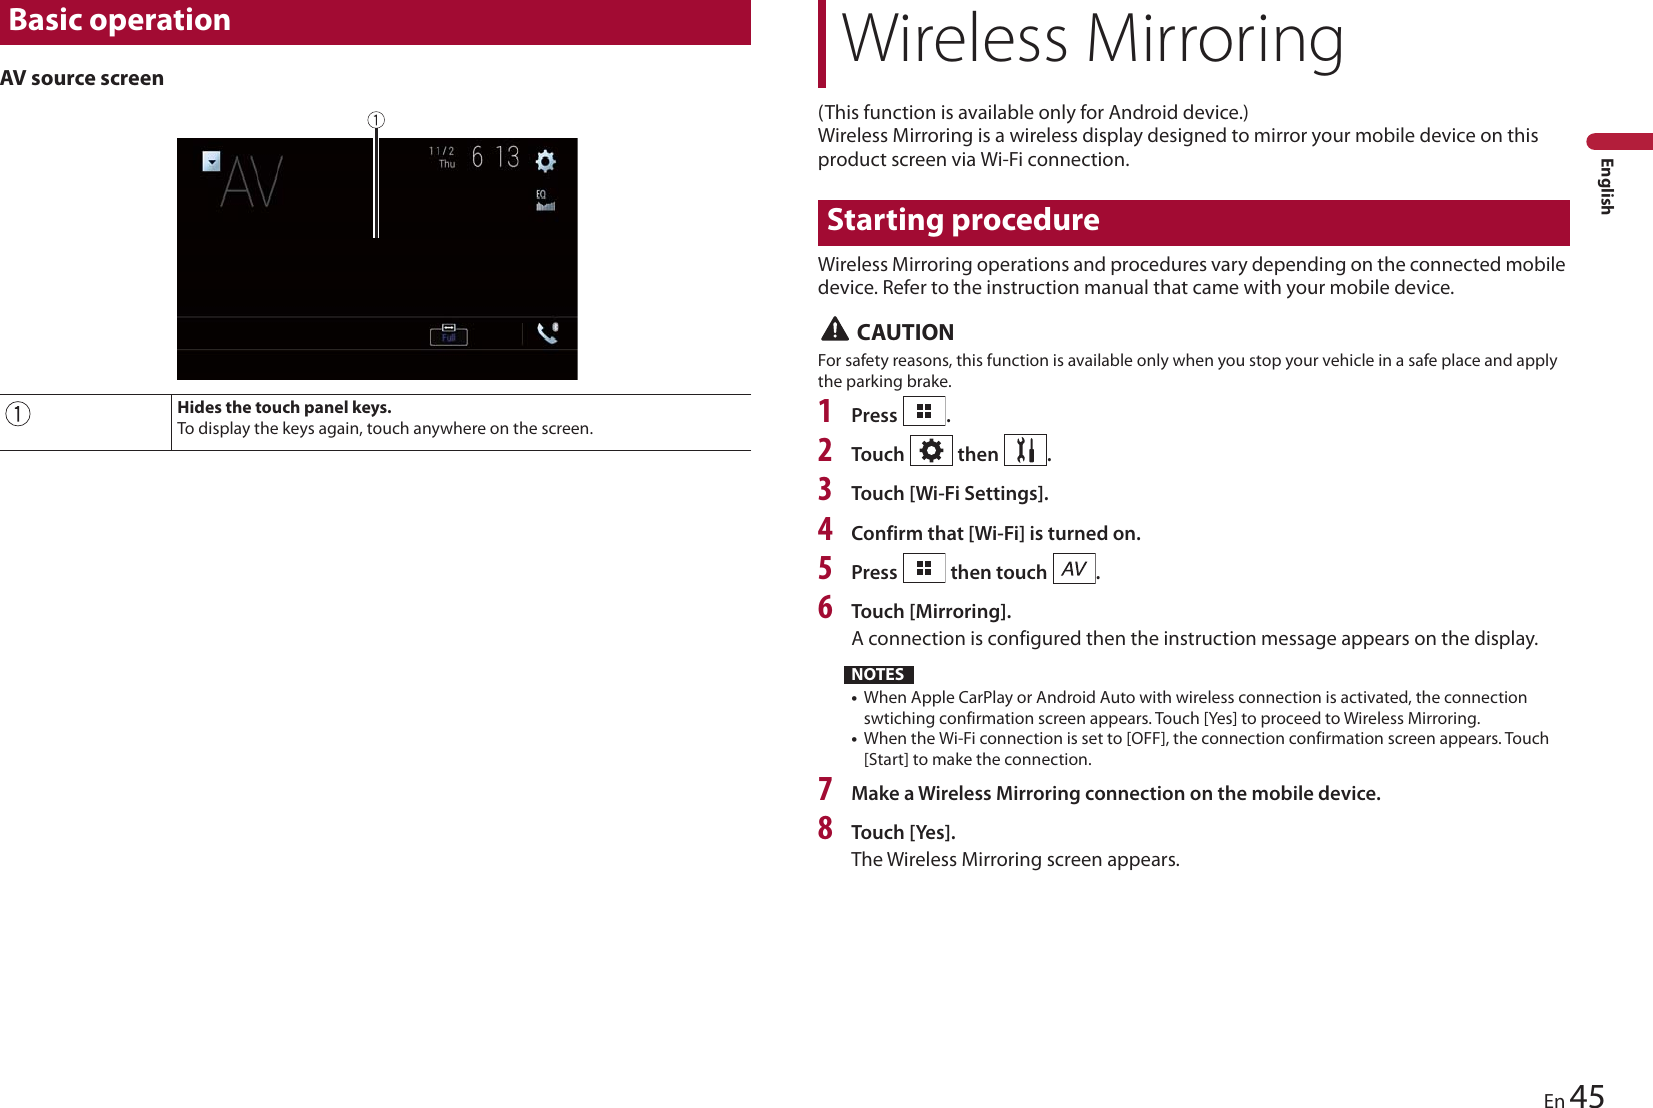 Basic operationHides the touch panel keys.To display the keys again, touch anywhere on the screen.Wireless Mirroring45EnEnglishAV source screen(This function is available only for Android device.)Wireless Mirroring is a wireless display designed to mirror your mobile device on this product screen via Wi-Fi connection.Starting procedureWireless Mirroring operations and procedures vary depending on the connected mobile device. Refer to the instruction manual that came with your mobile device. CAUTIONFor safety reasons, this function is available only when you stop your vehicle in a safe place and apply the parking brake.1Press  .2Touch   then  .3Touch [Wi-Fi Settings].4Confirm that [Wi-Fi] is turned on.5Press   then touch  .6Touch [Mirroring].A connection is configured then the instruction message appears on the display.NOTES•When Apple CarPlay or Android Auto with wireless connection is activated, the connection swtiching confirmation screen appears. Touch [Yes] to proceed to Wireless Mirroring.•When the Wi-Fi connection is set to [OFF], the connection confirmation screen appears. Touch [Start] to make the connection.7Make a Wireless Mirroring connection on the mobile device.8Touch [Yes].The Wireless Mirroring screen appears.